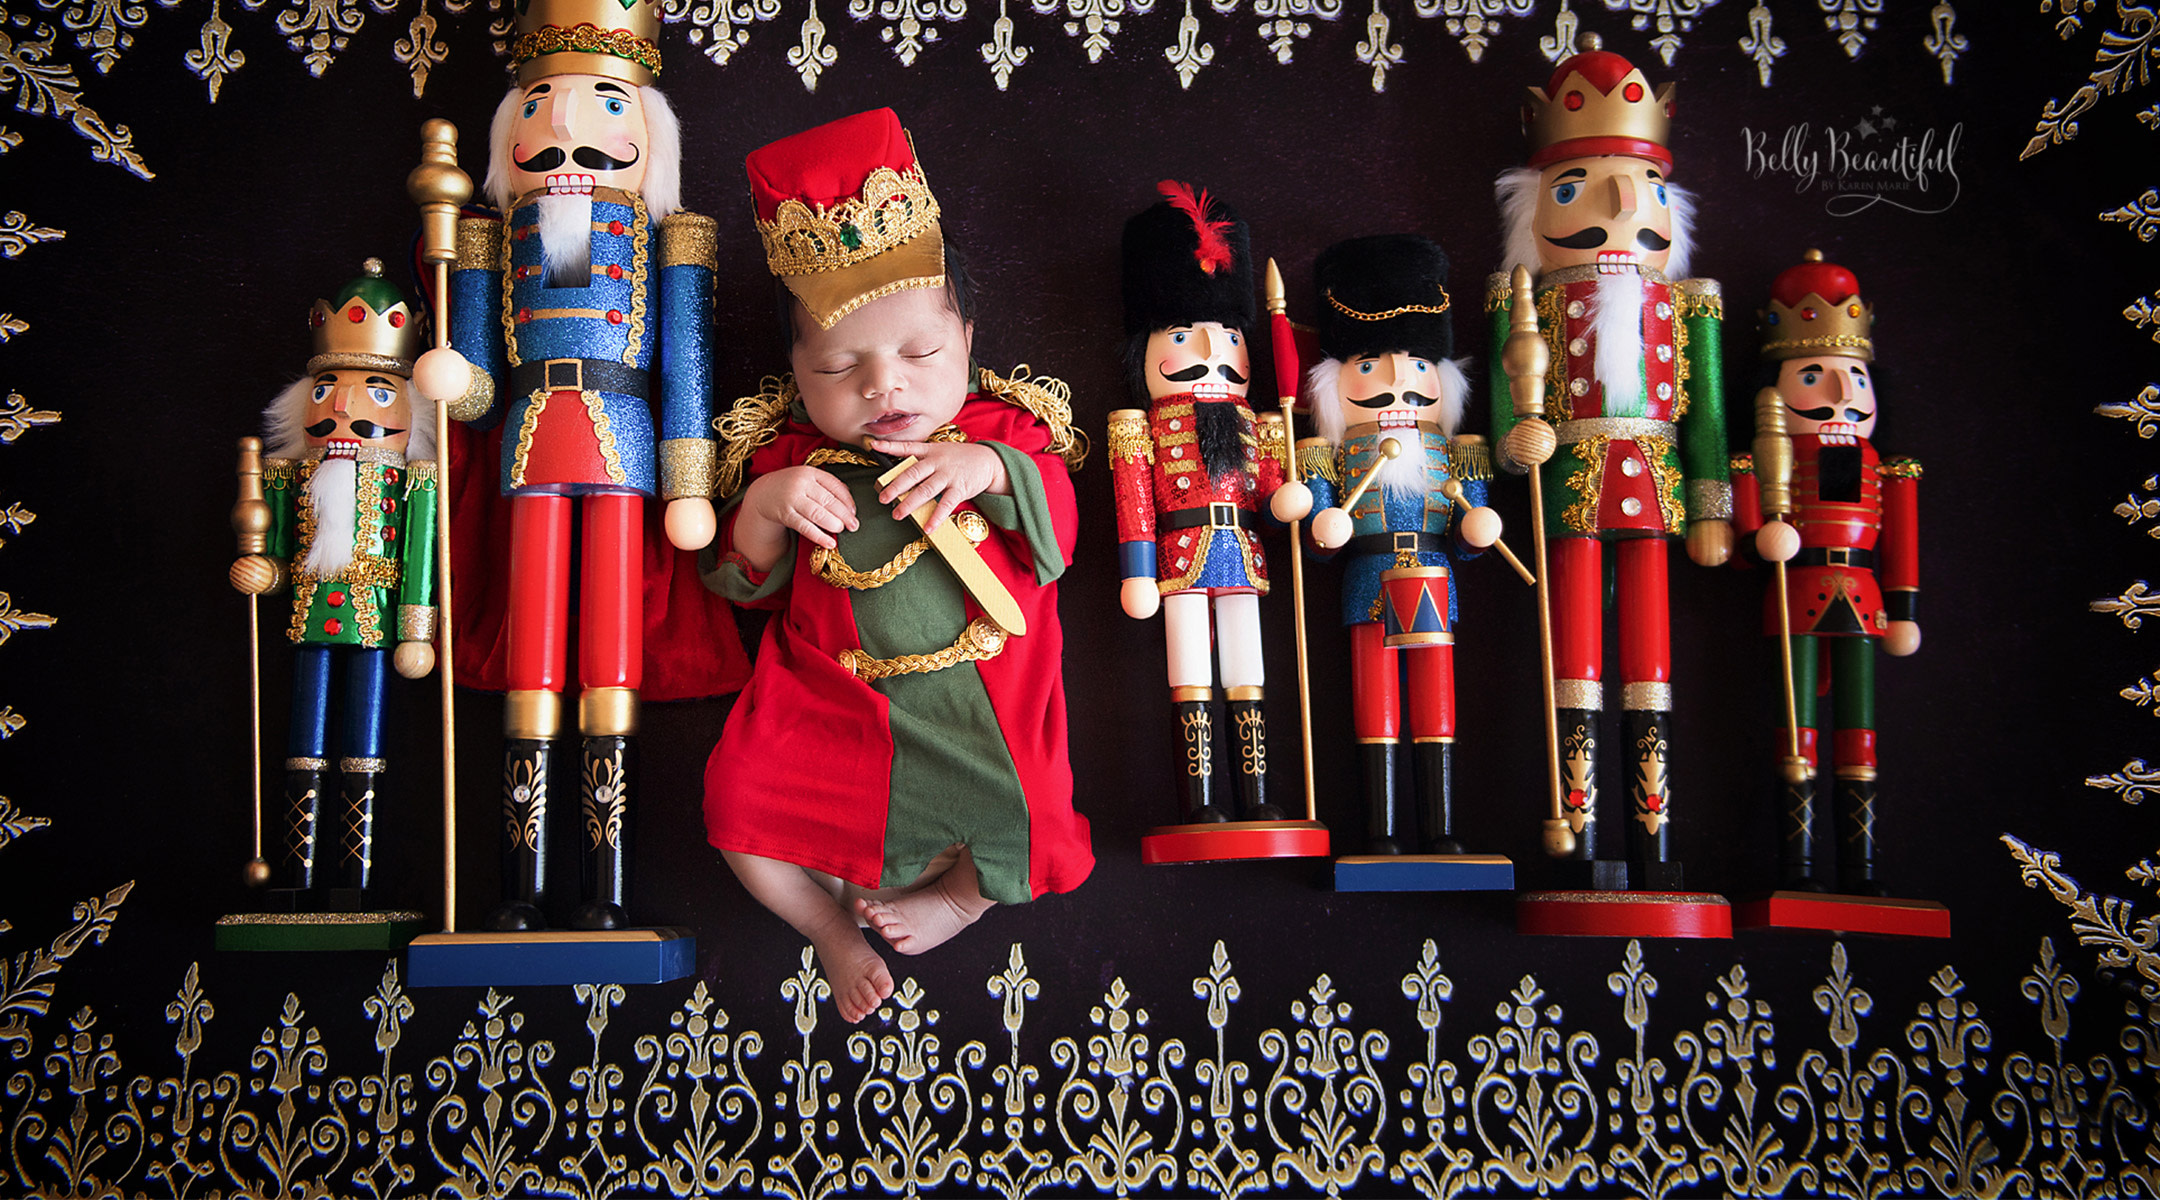 newborn baby dressed as the nutcracker prince, surrounded by actual wooden nutcrackers